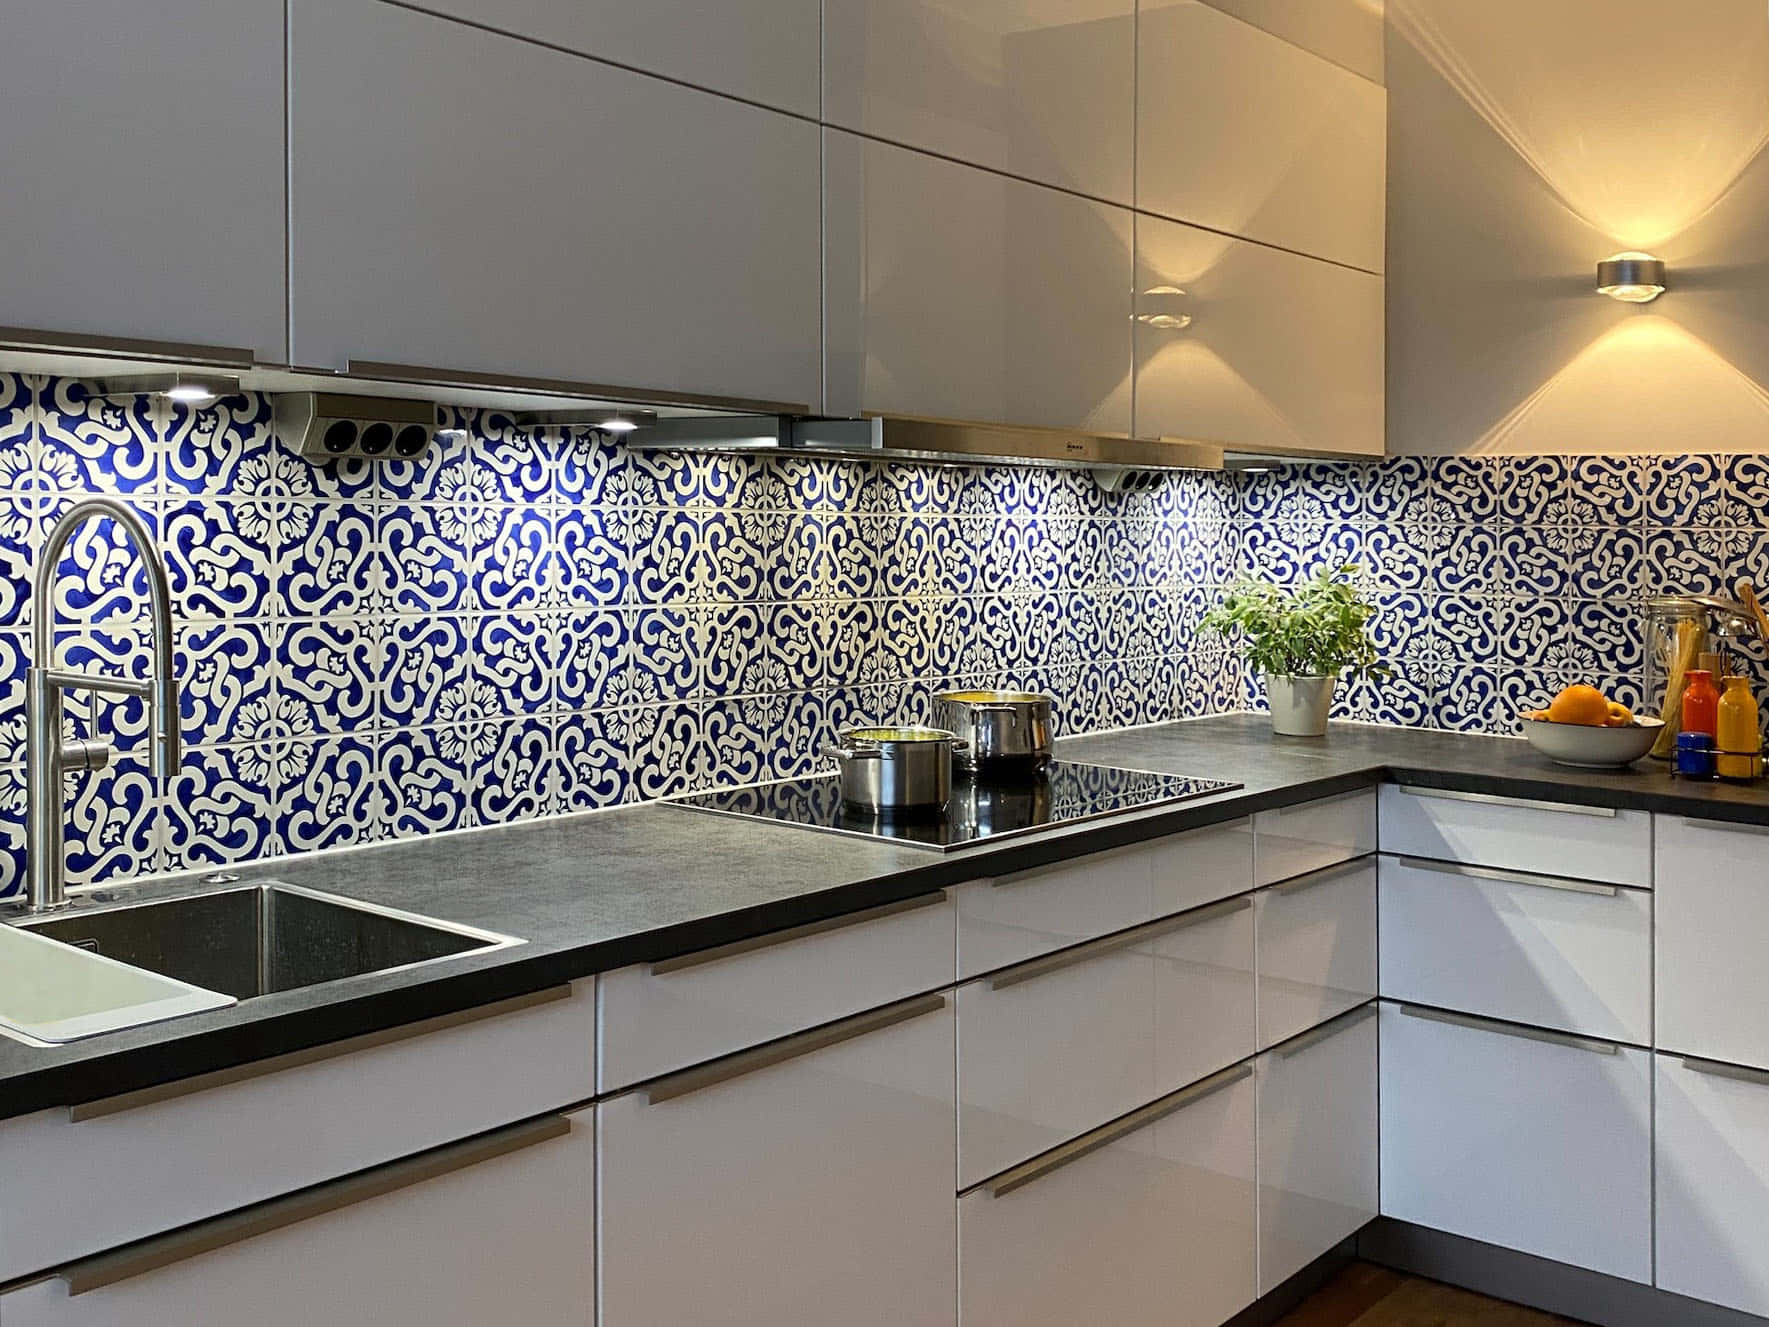 Download A White Kitchen With Blue And White Tile | Wallpapers.com